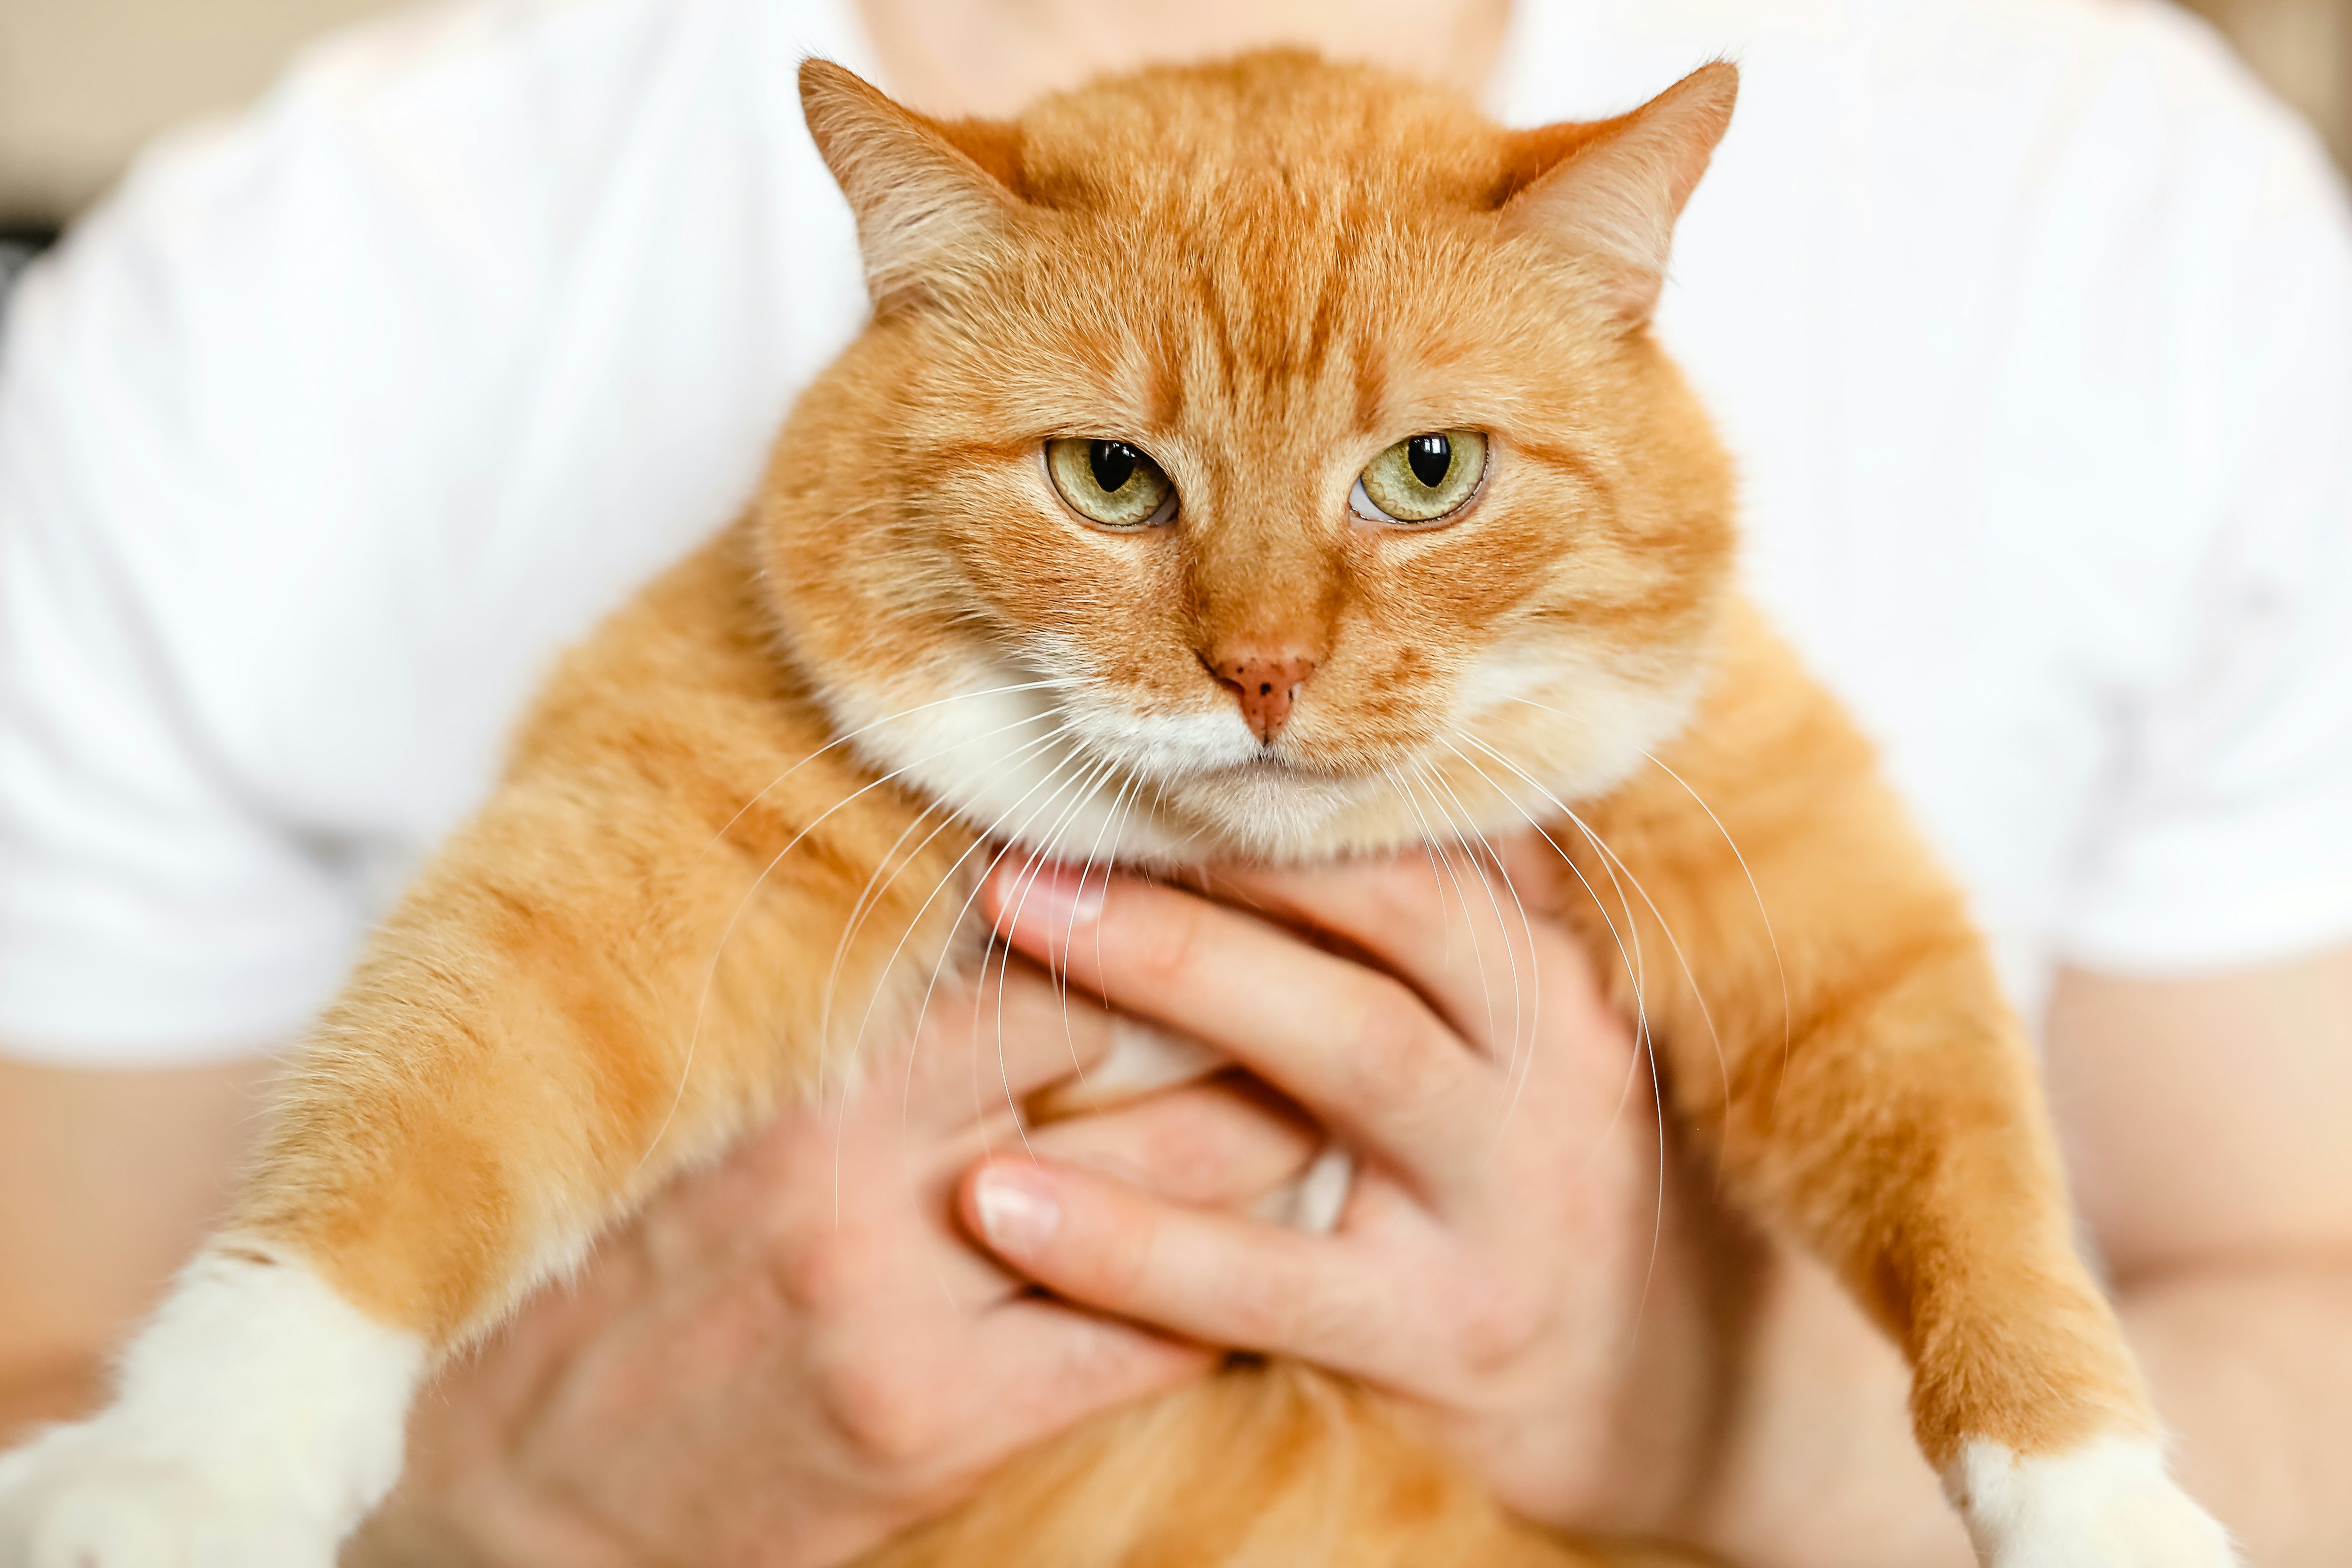 Feline Body Language: What Your Cat's Eyes Tell You About His